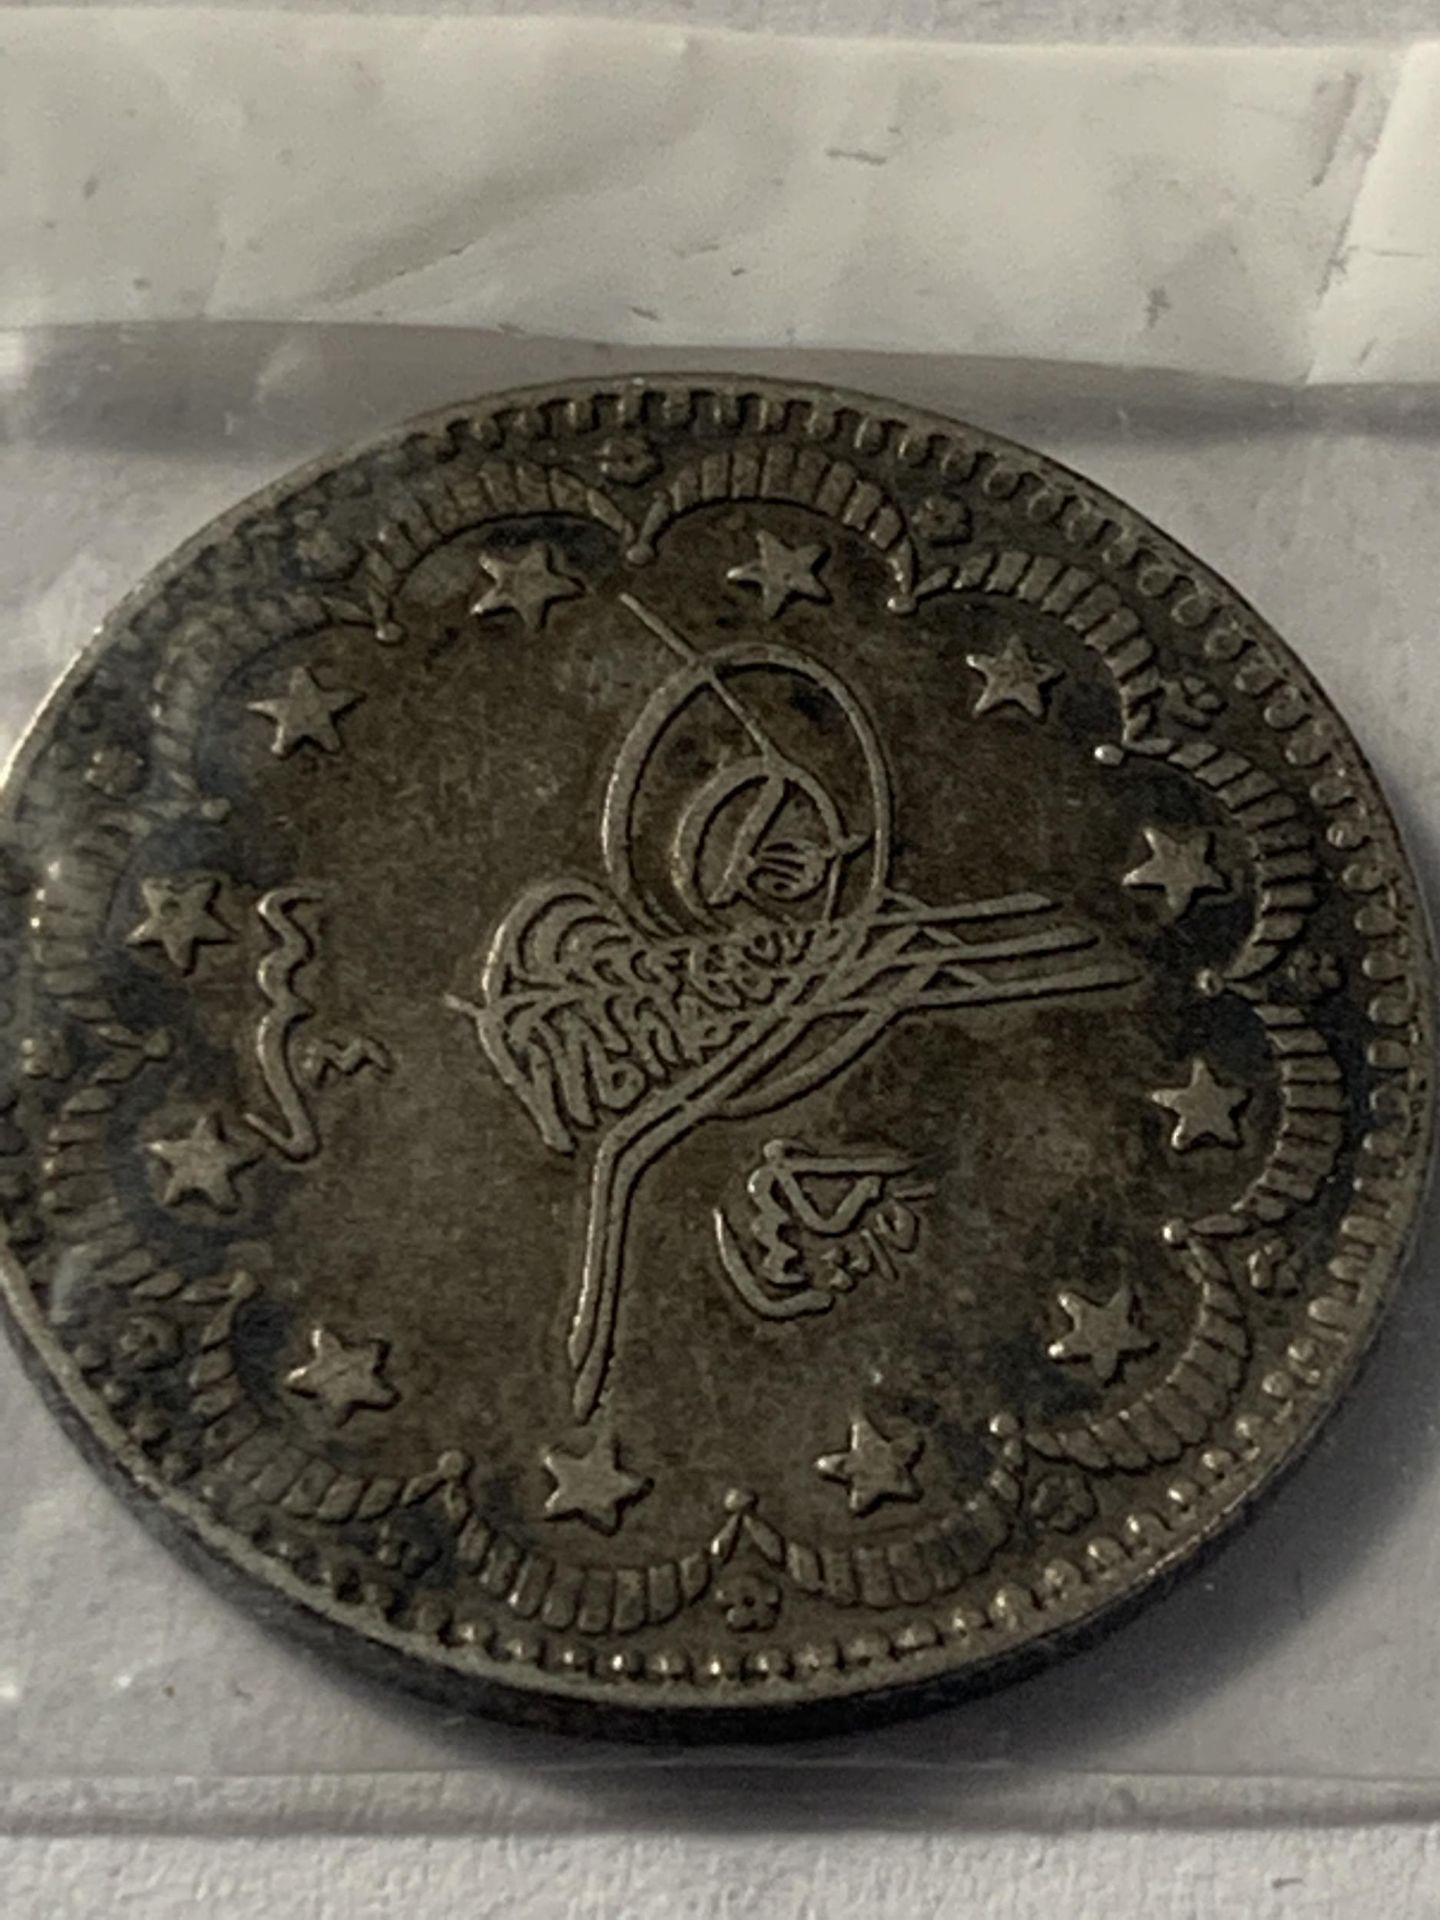 A BELIEVED 1909 OTTOMAN EMPIRE FIVE KURUS COIN - Image 2 of 2